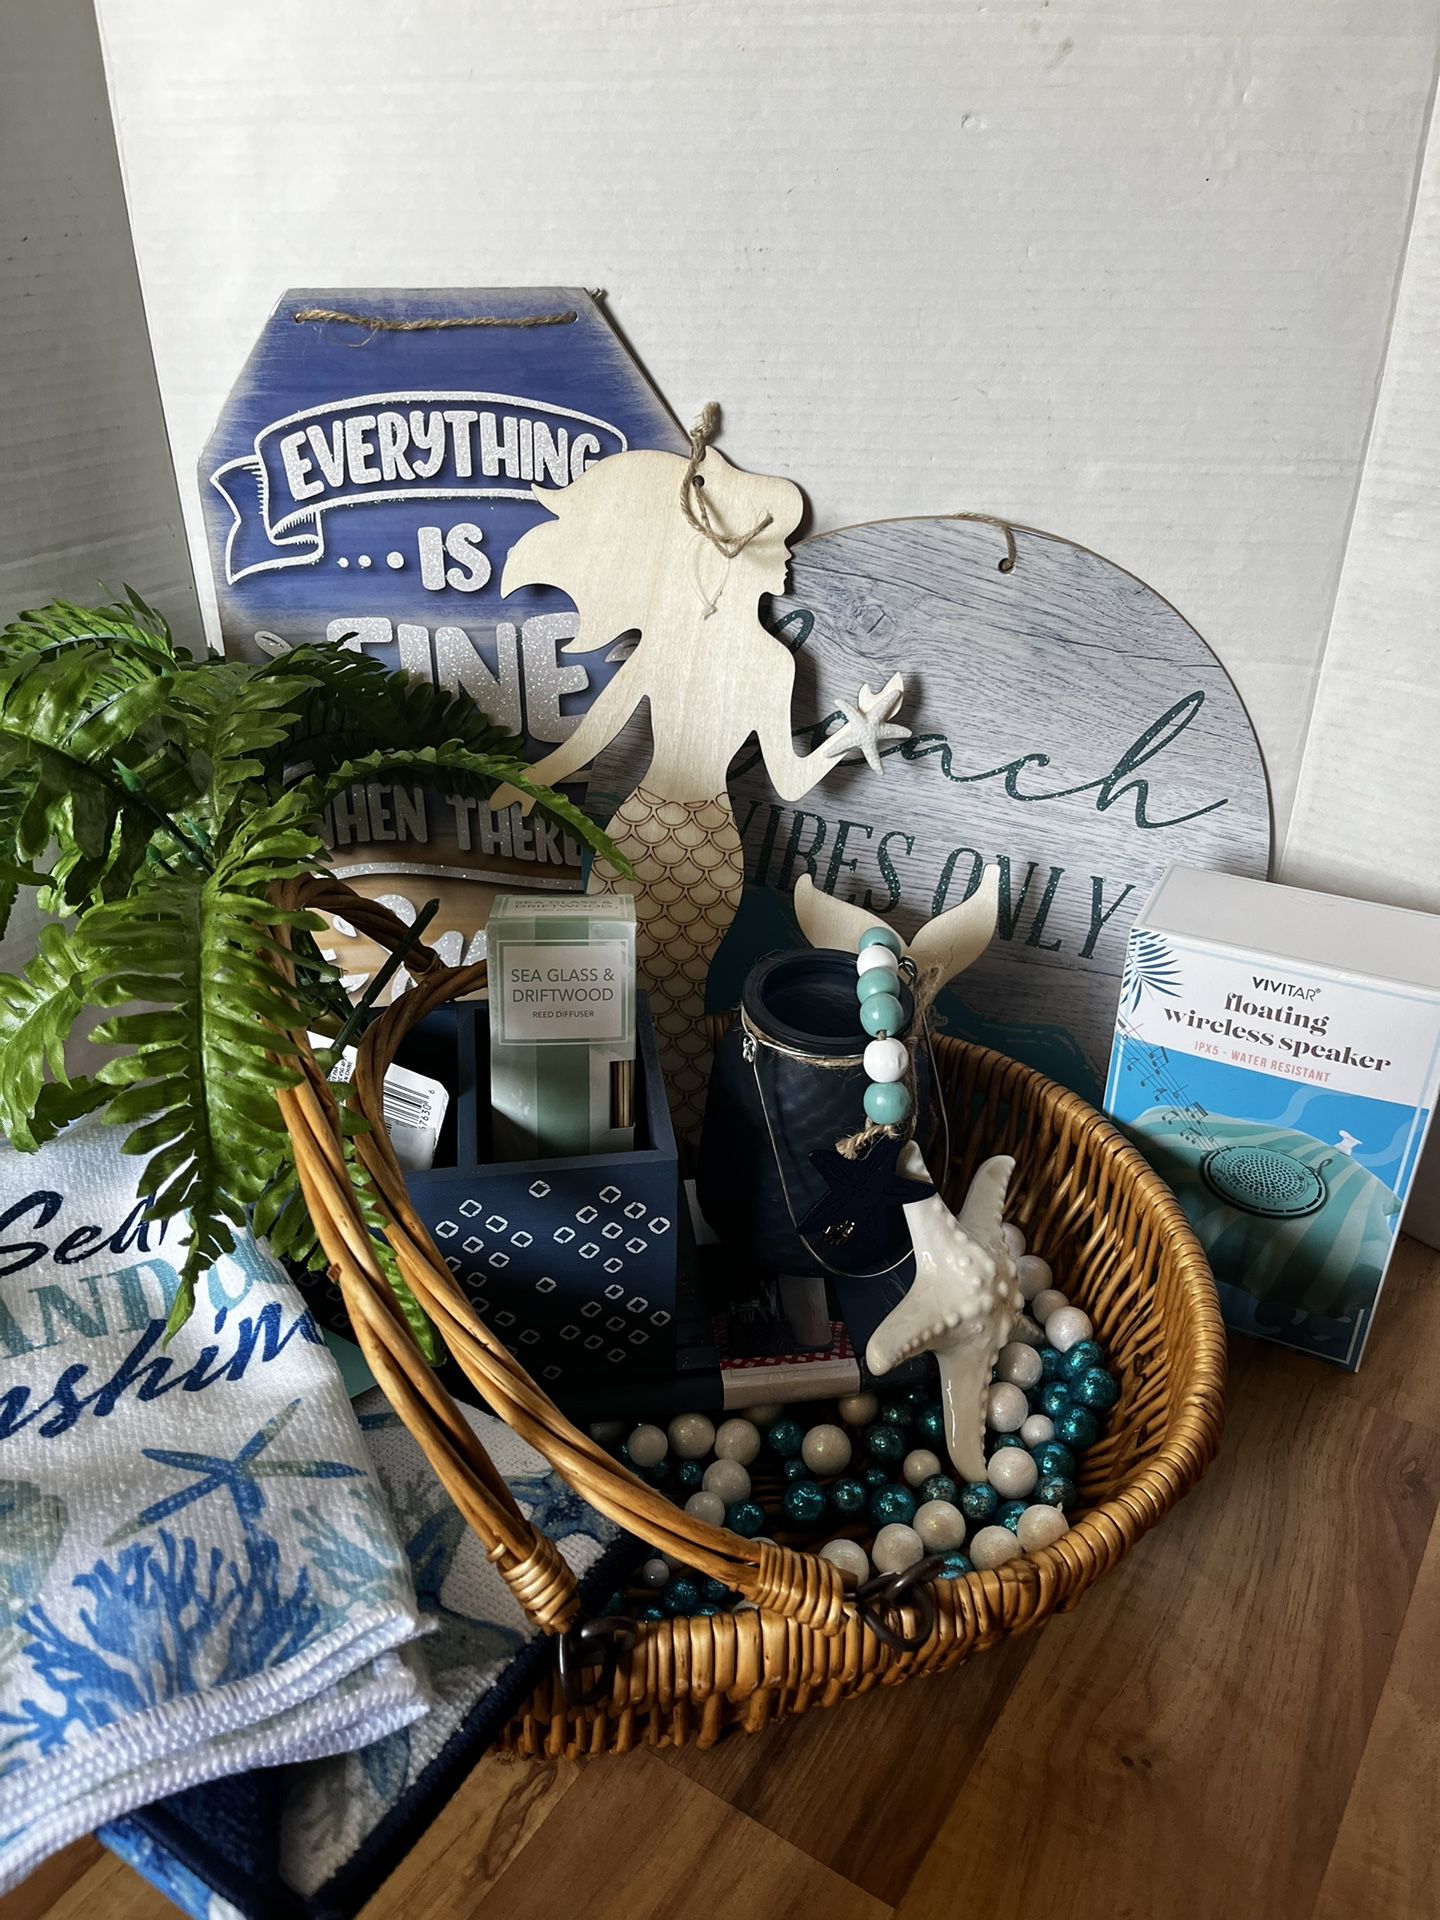 Gift Basket Mermaid Under The Sea Decor Tiered Tray Items for Sale in  Bakersfield, CA - OfferUp